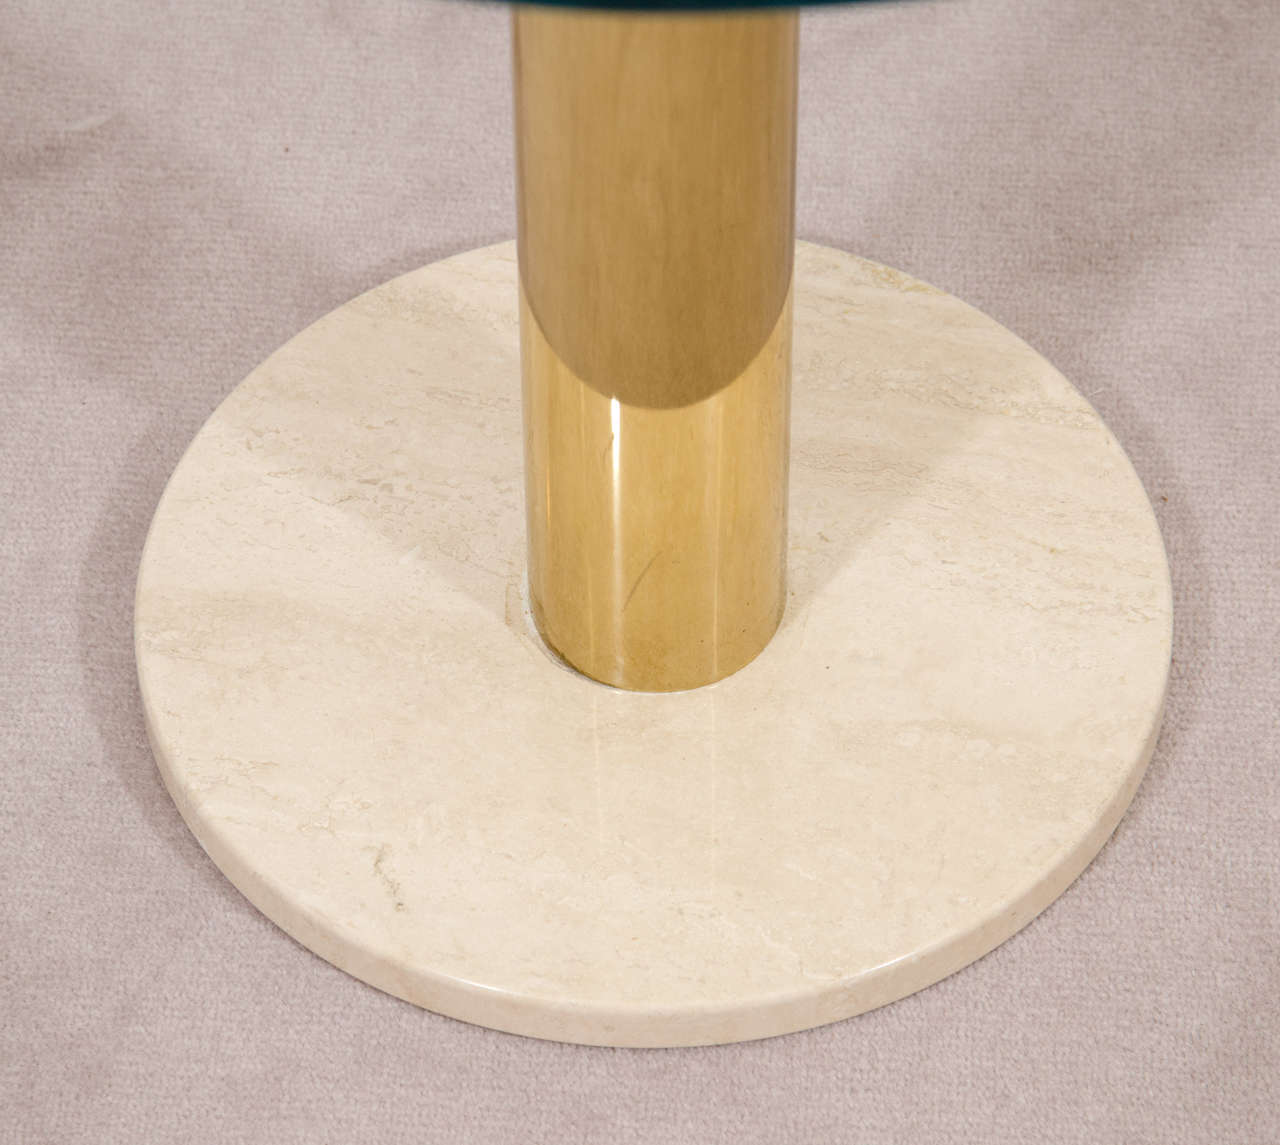 Late 20th Century Modern Italian Round Brass, Glass and Marble Side Table by Pace, ca. 1970s